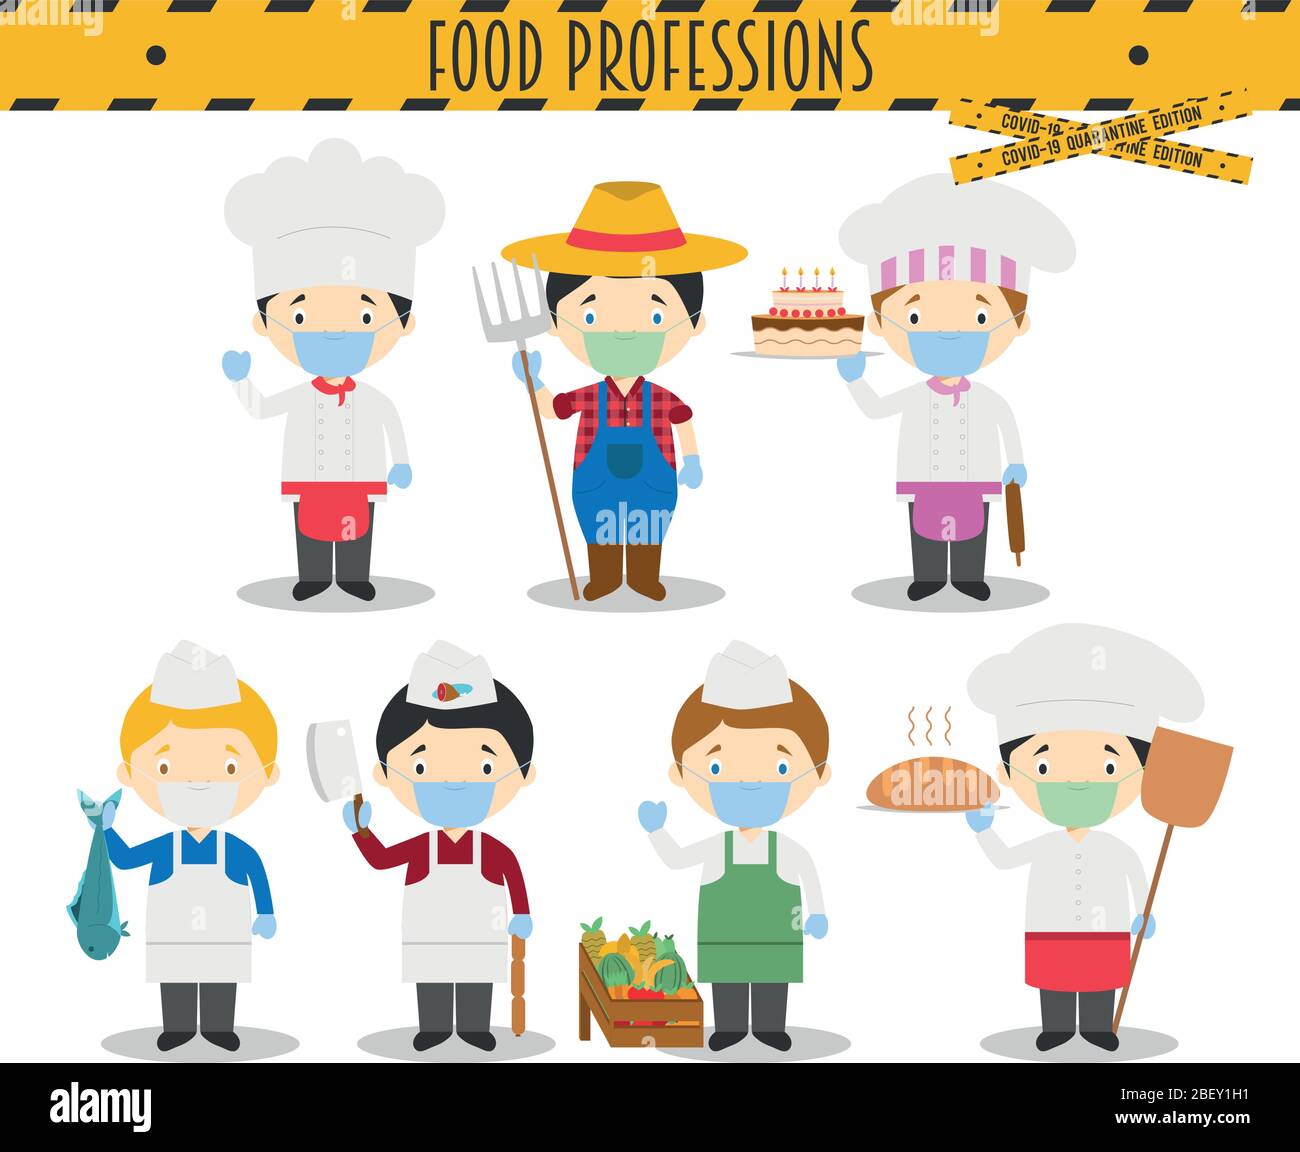 Covid 19 Health Emergency Special Edition: Vector Set of Food Industry Professions with surgical masks and latex gloves in cartoon style Stock Vector